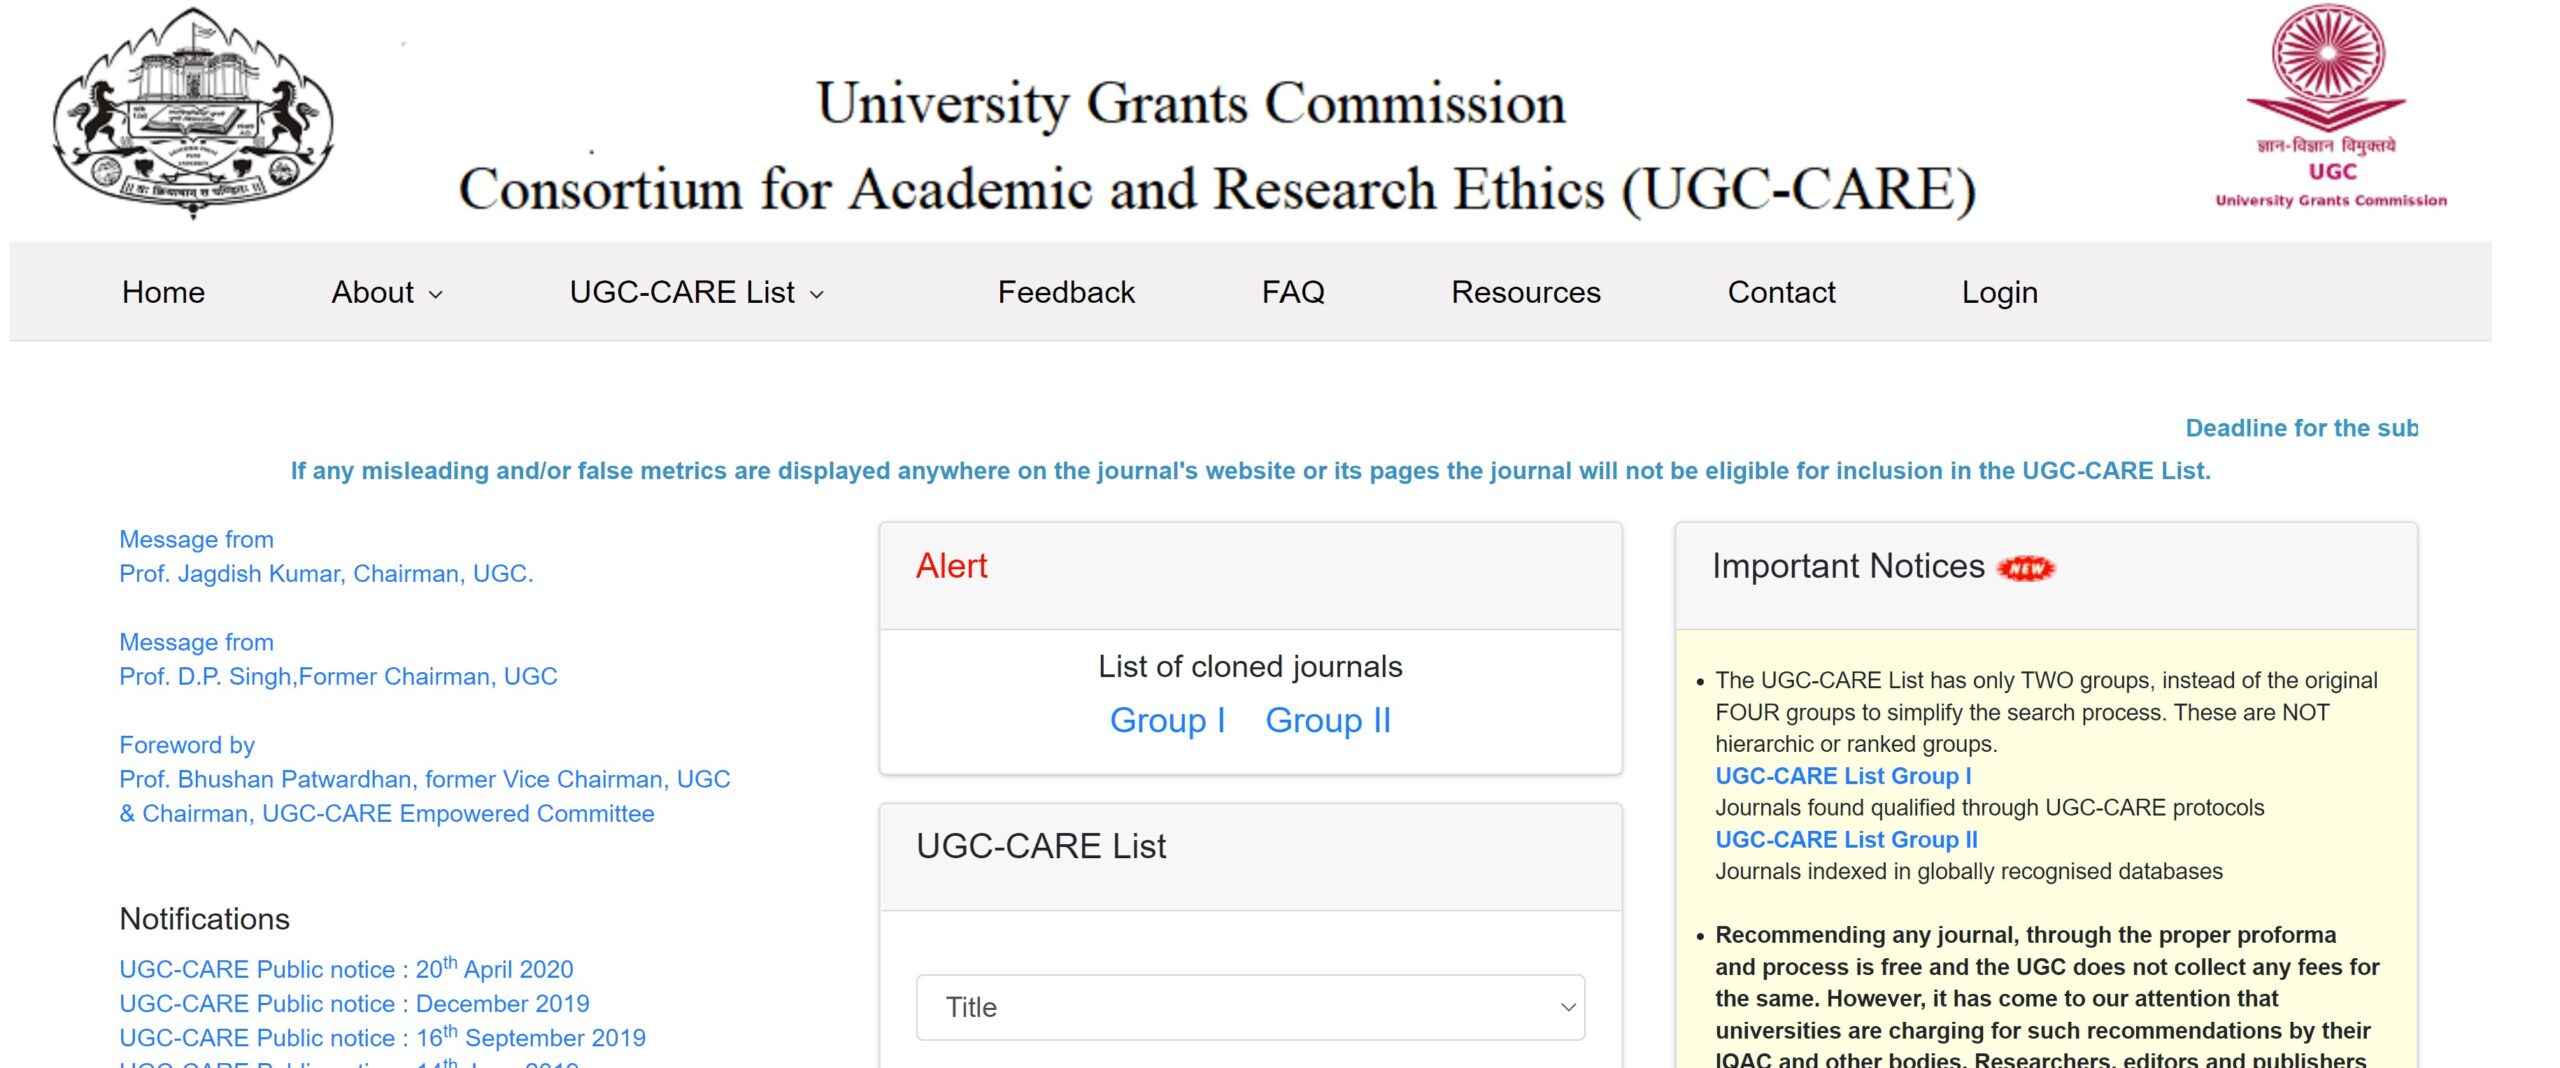 how to find ugc care list journals